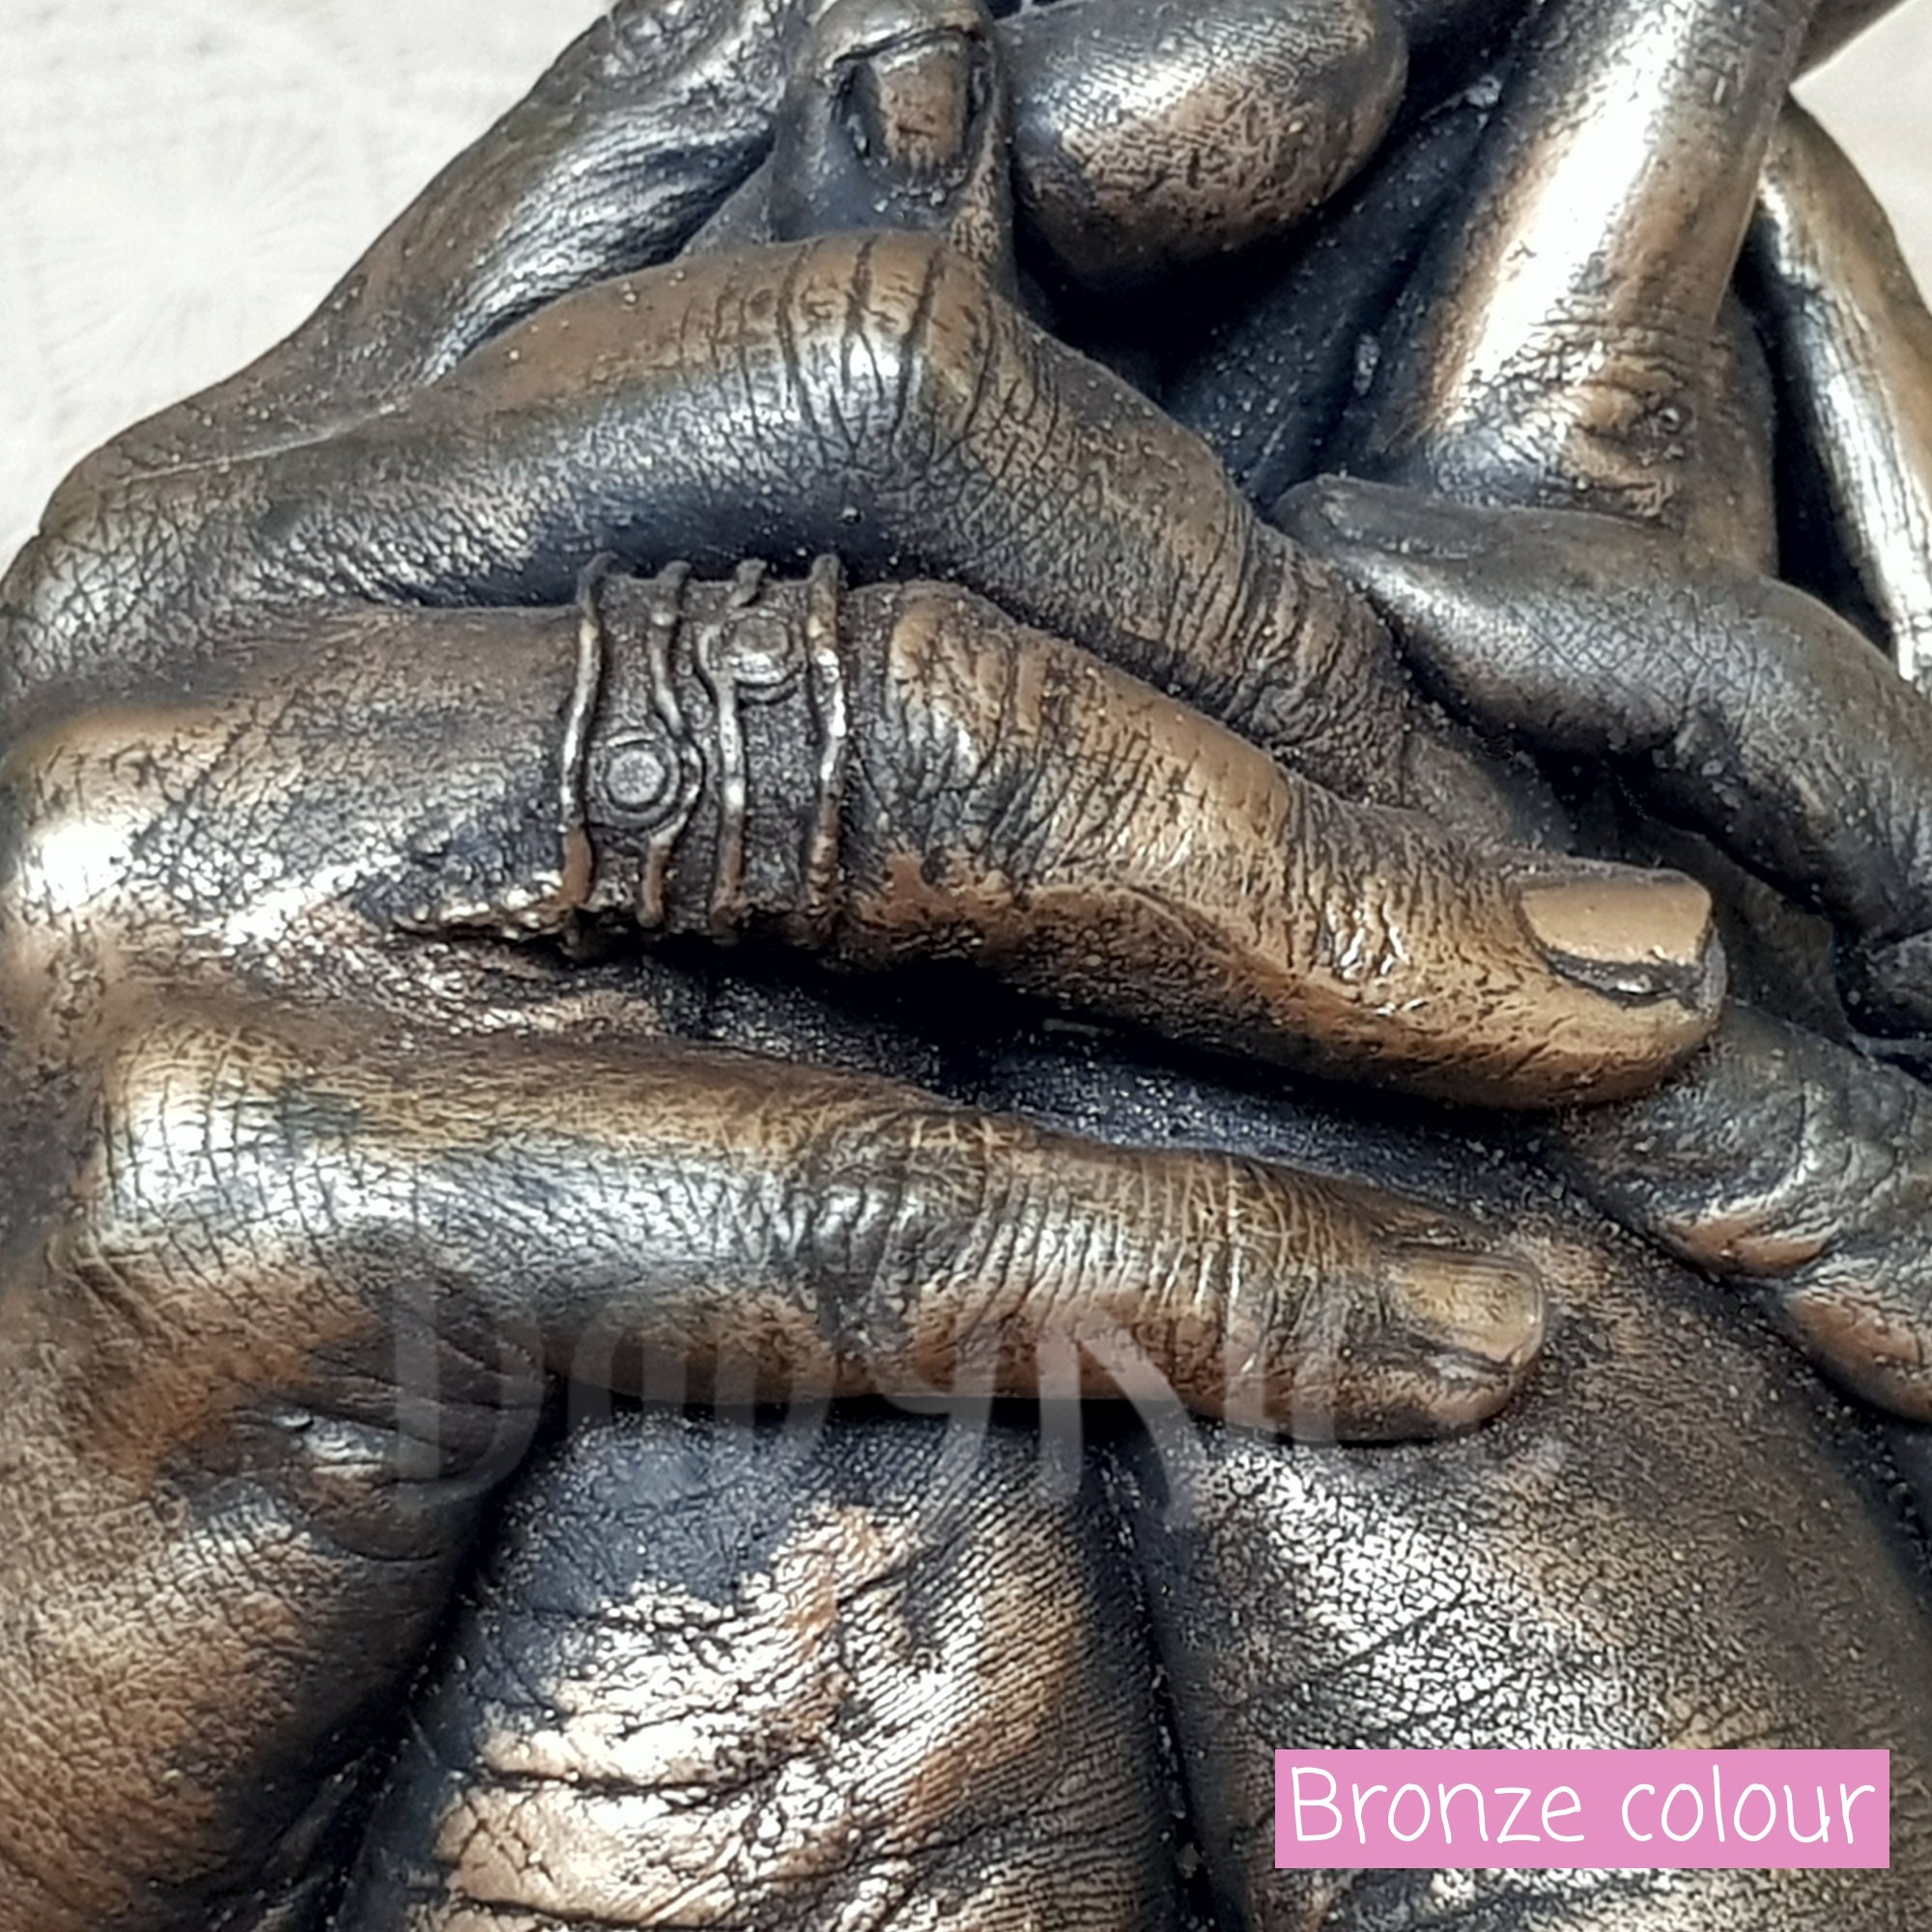 Couple Holding Hand Casting Kit DIY 3D Adult Hands Impression Mould Plaster  Cast With Paint & Metallic Wax Memory Keepsake Valentine's Gift -   Sweden